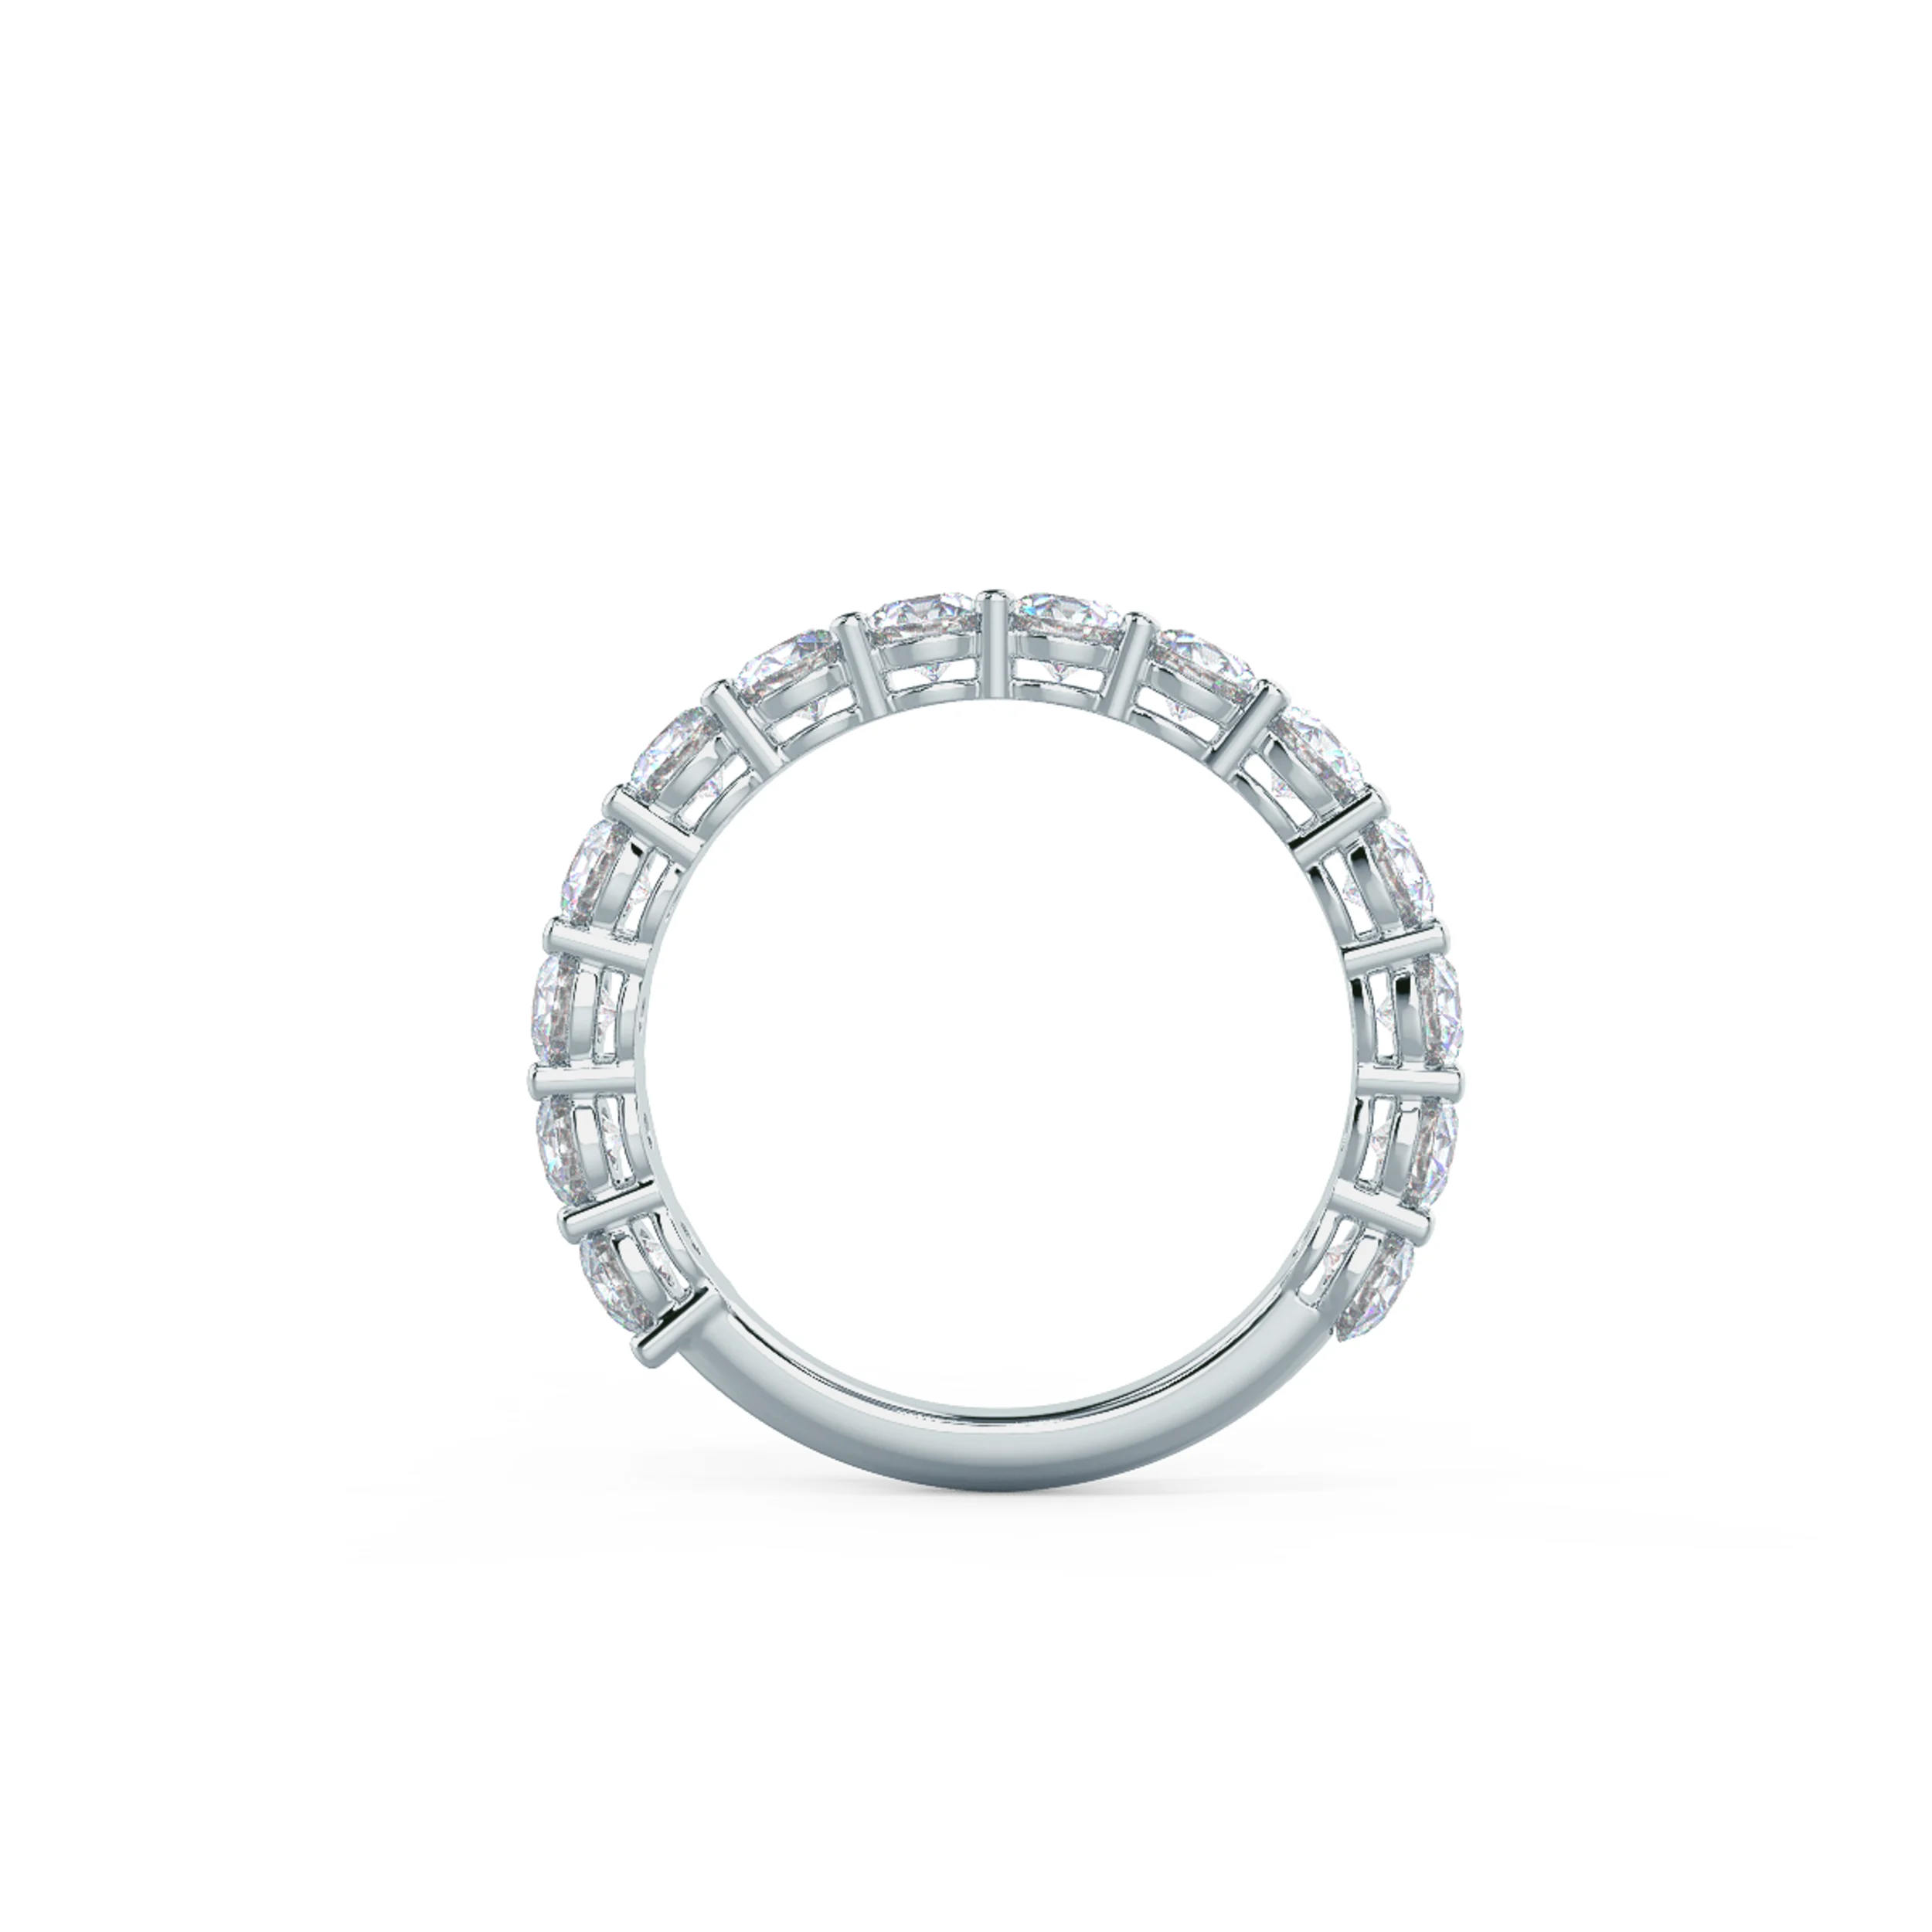 Hand Selected 2.0 Carat Round Brilliant Diamonds set in White Gold Prong Set Three Quarter Band (Profile View)